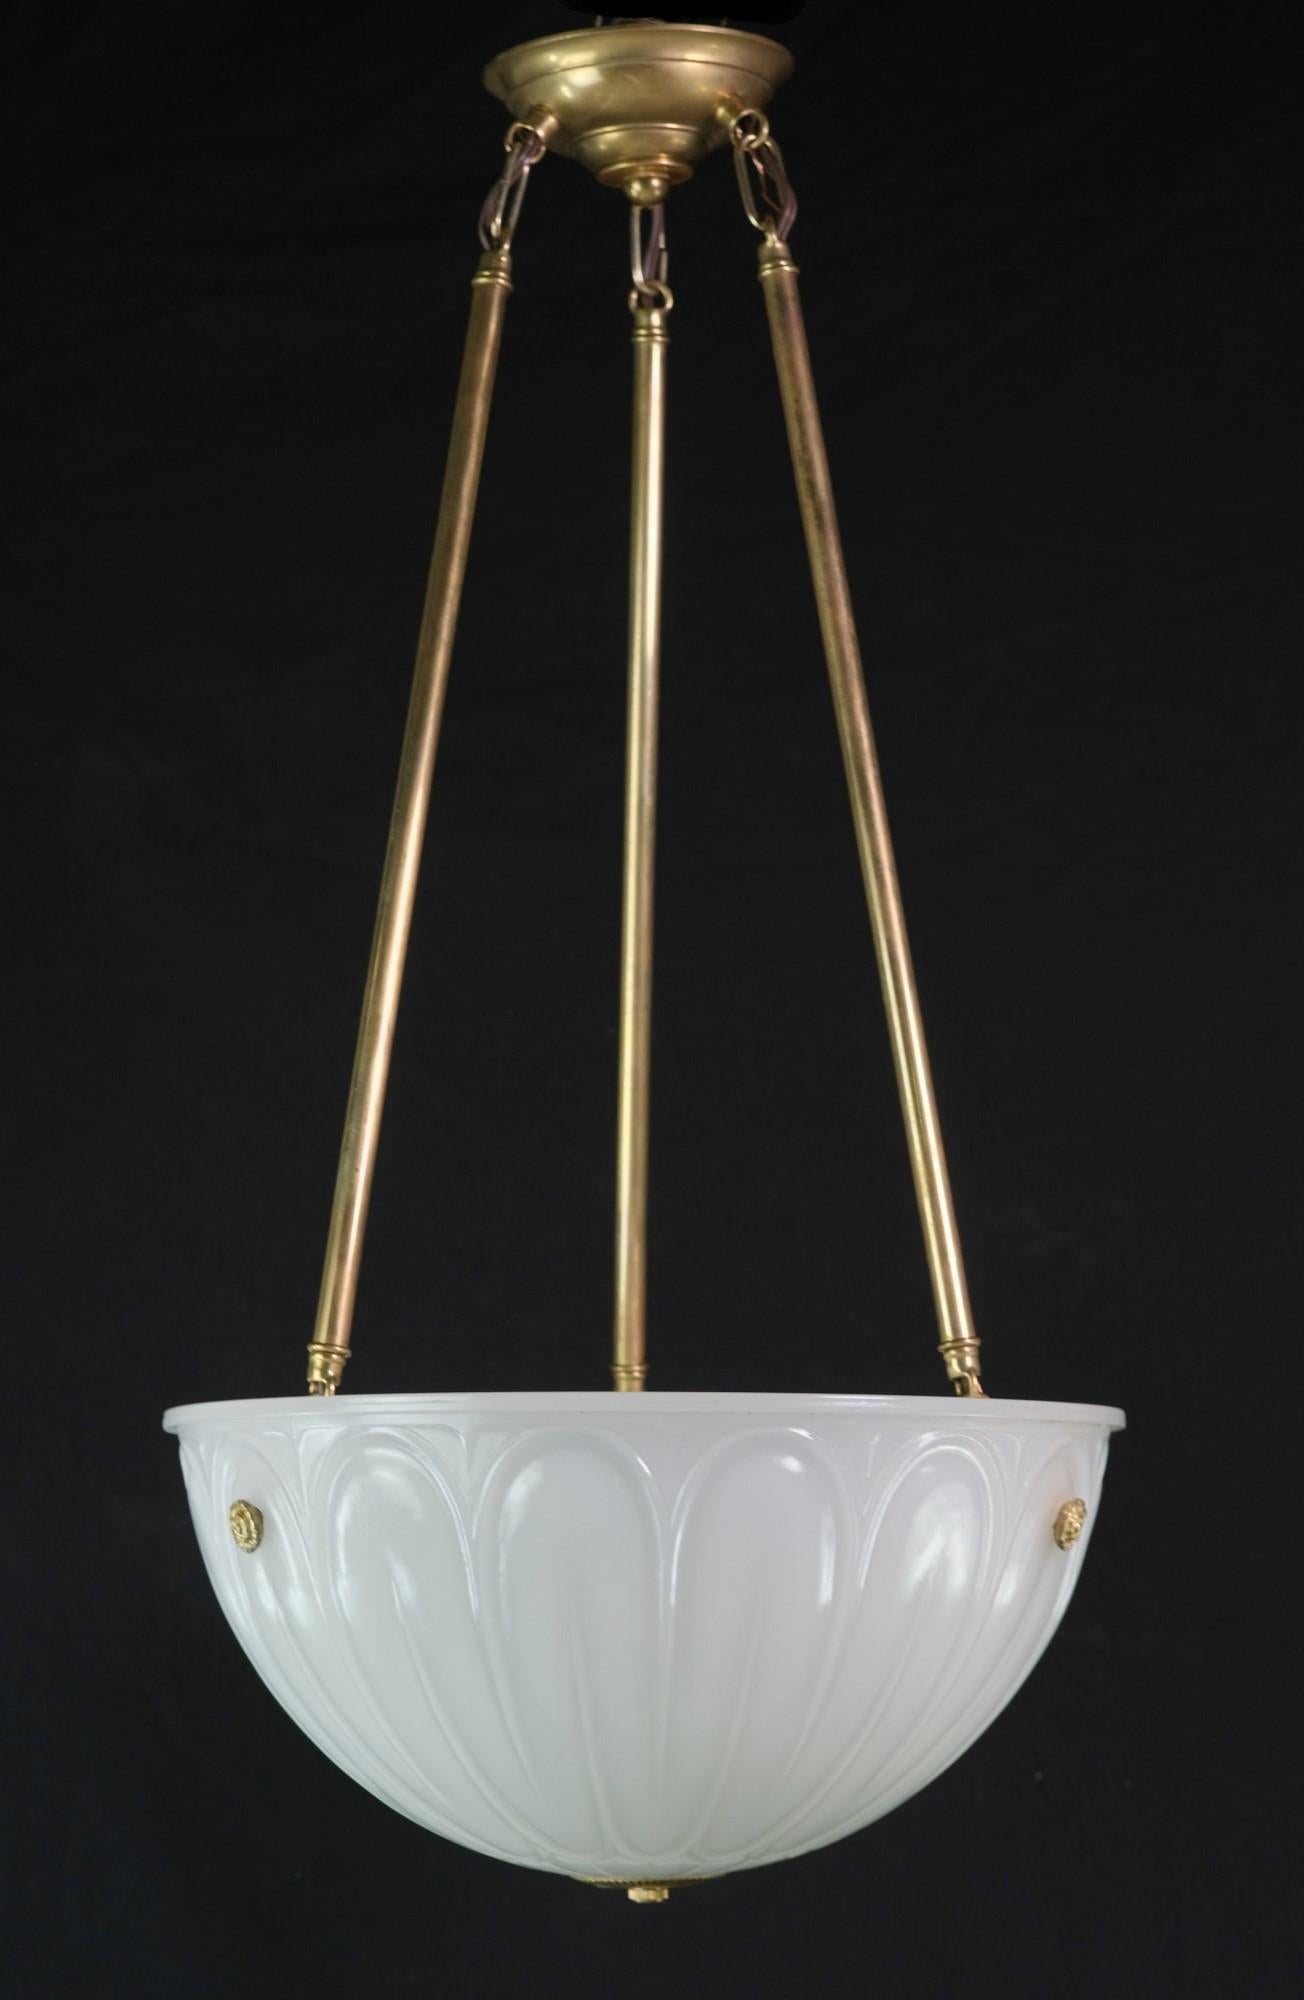 1920s cast milk glass opaque white dish pendant light with brass hardware. Including brass plated steel florets, poles, and canopy. Takes three E26 light bulbs. This can be seen at our 400 Gilligan St location in Scranton, PA.